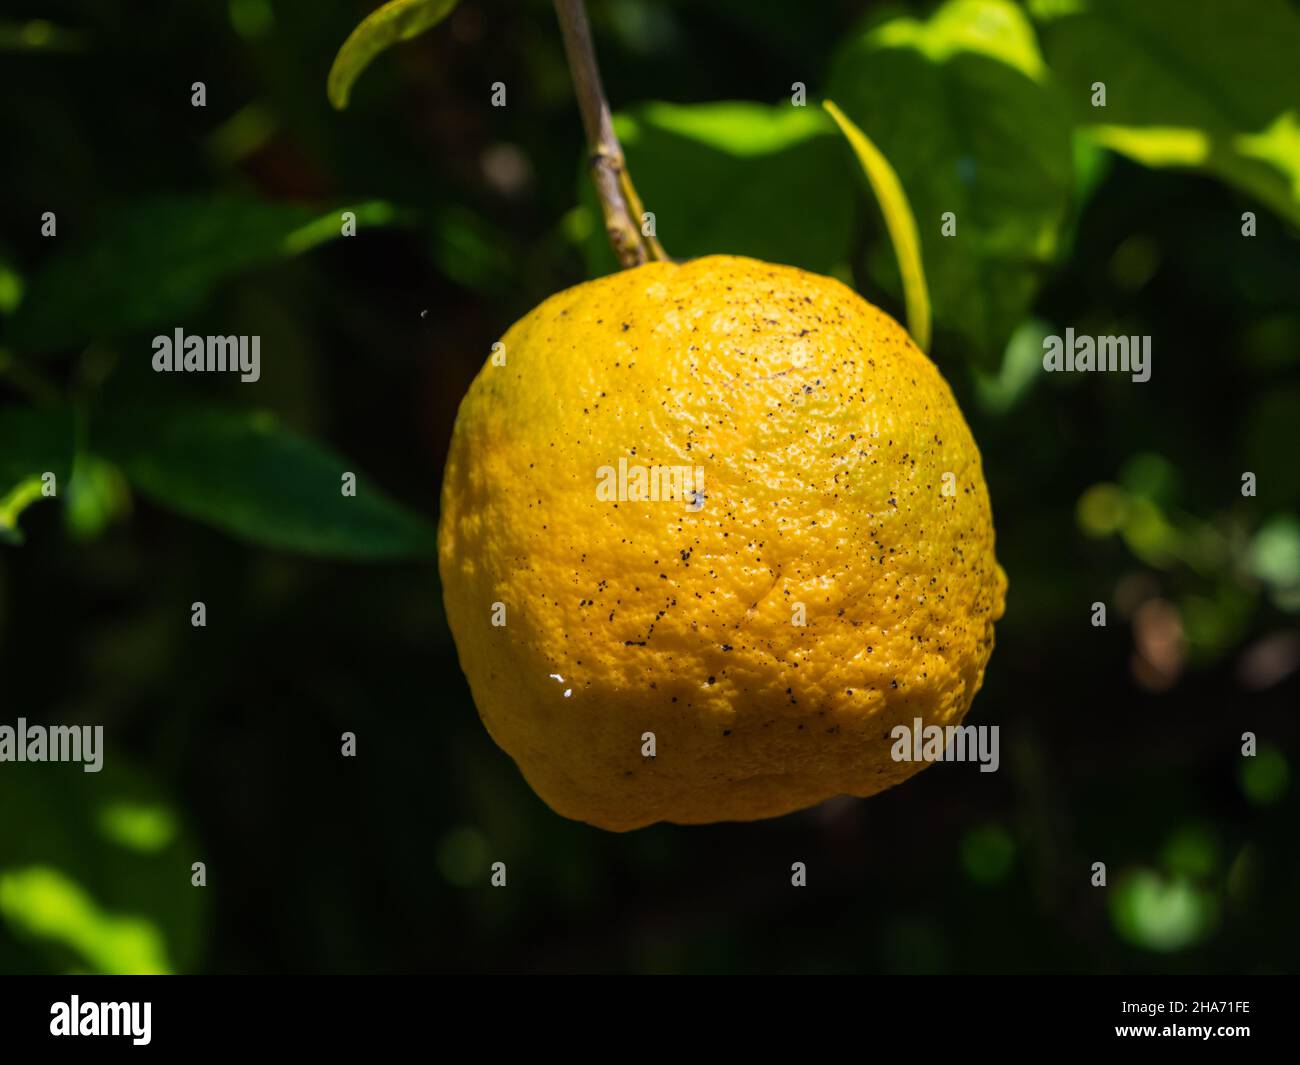 Bitter Orange, also called Sour or Bigarade Orange hanging on its Tree in an Orchard Stock Photo